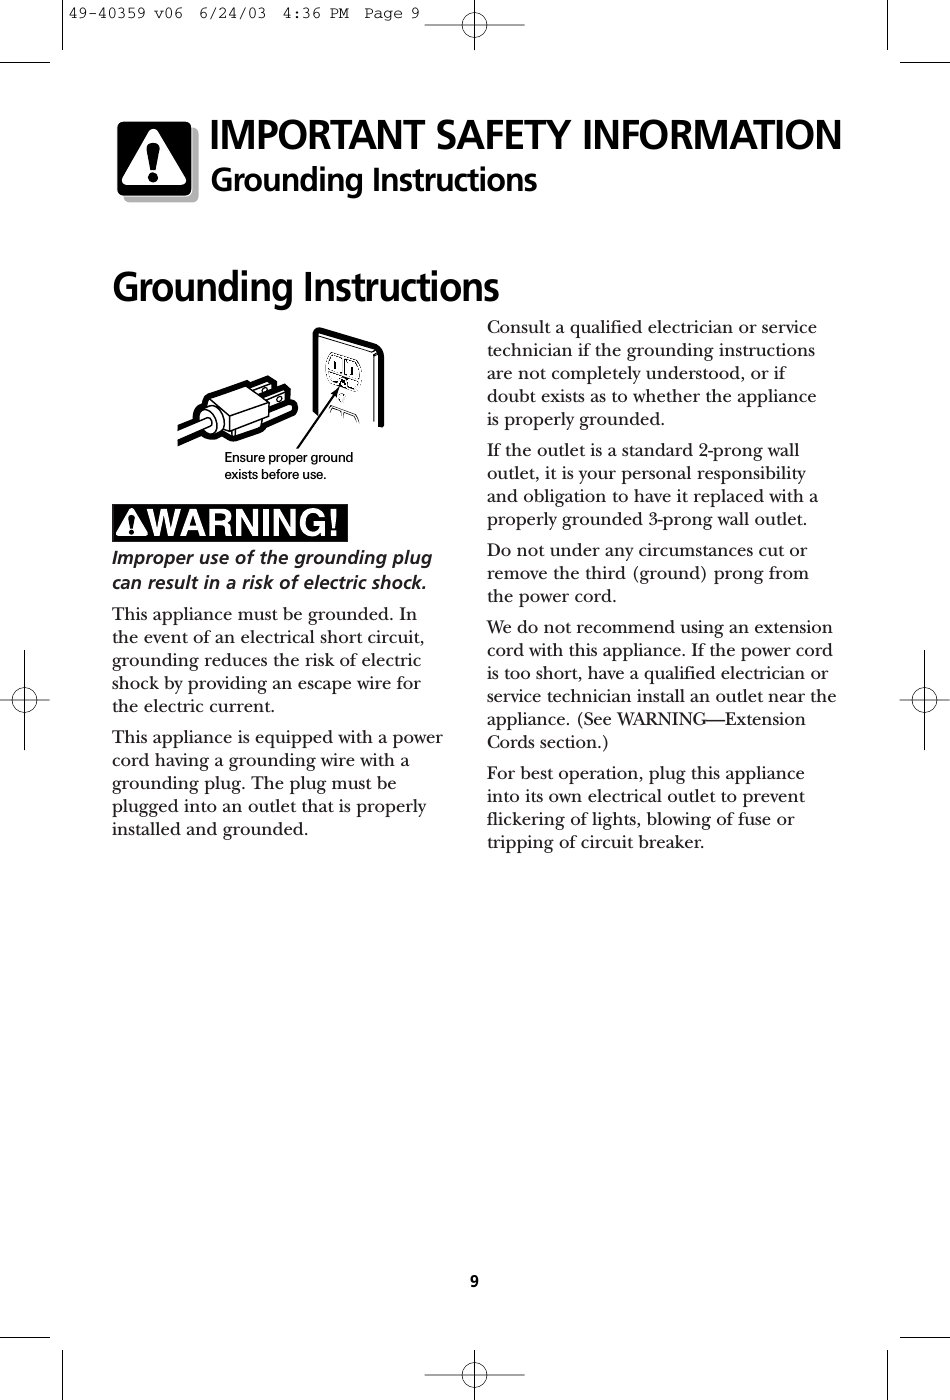 Improper use of the grounding plugcan result in a risk of electric shock.This appliance must be grounded. In the event of an electrical short circuit,grounding reduces the risk of electricshock by providing an escape wire for the electric current. This appliance is equipped with a powercord having a grounding wire with agrounding plug. The plug must beplugged into an outlet that is properlyinstalled and grounded.Consult a qualified electrician or servicetechnician if the grounding instructionsare not completely understood, or ifdoubt exists as to whether the appliance is properly grounded.If the outlet is a standard 2-prong walloutlet, it is your personal responsibilityand obligation to have it replaced with aproperly grounded 3-prong wall outlet.Do not under any circumstances cut orremove the third (ground) prong fromthe power cord.We do not recommend using an extensioncord with this appliance. If the power cordis too short, have a qualified electrician orservice technician install an outlet near theappliance. (See WARNING—ExtensionCords section.)For best operation, plug this applianceinto its own electrical outlet to preventflickering of lights, blowing of fuse ortripping of circuit breaker.Grounding InstructionsEnsure proper groundexists before use.9IMPORTANT SAFETY INFORMATIONGrounding Instructions49-40359 v06  6/24/03  4:36 PM  Page 9